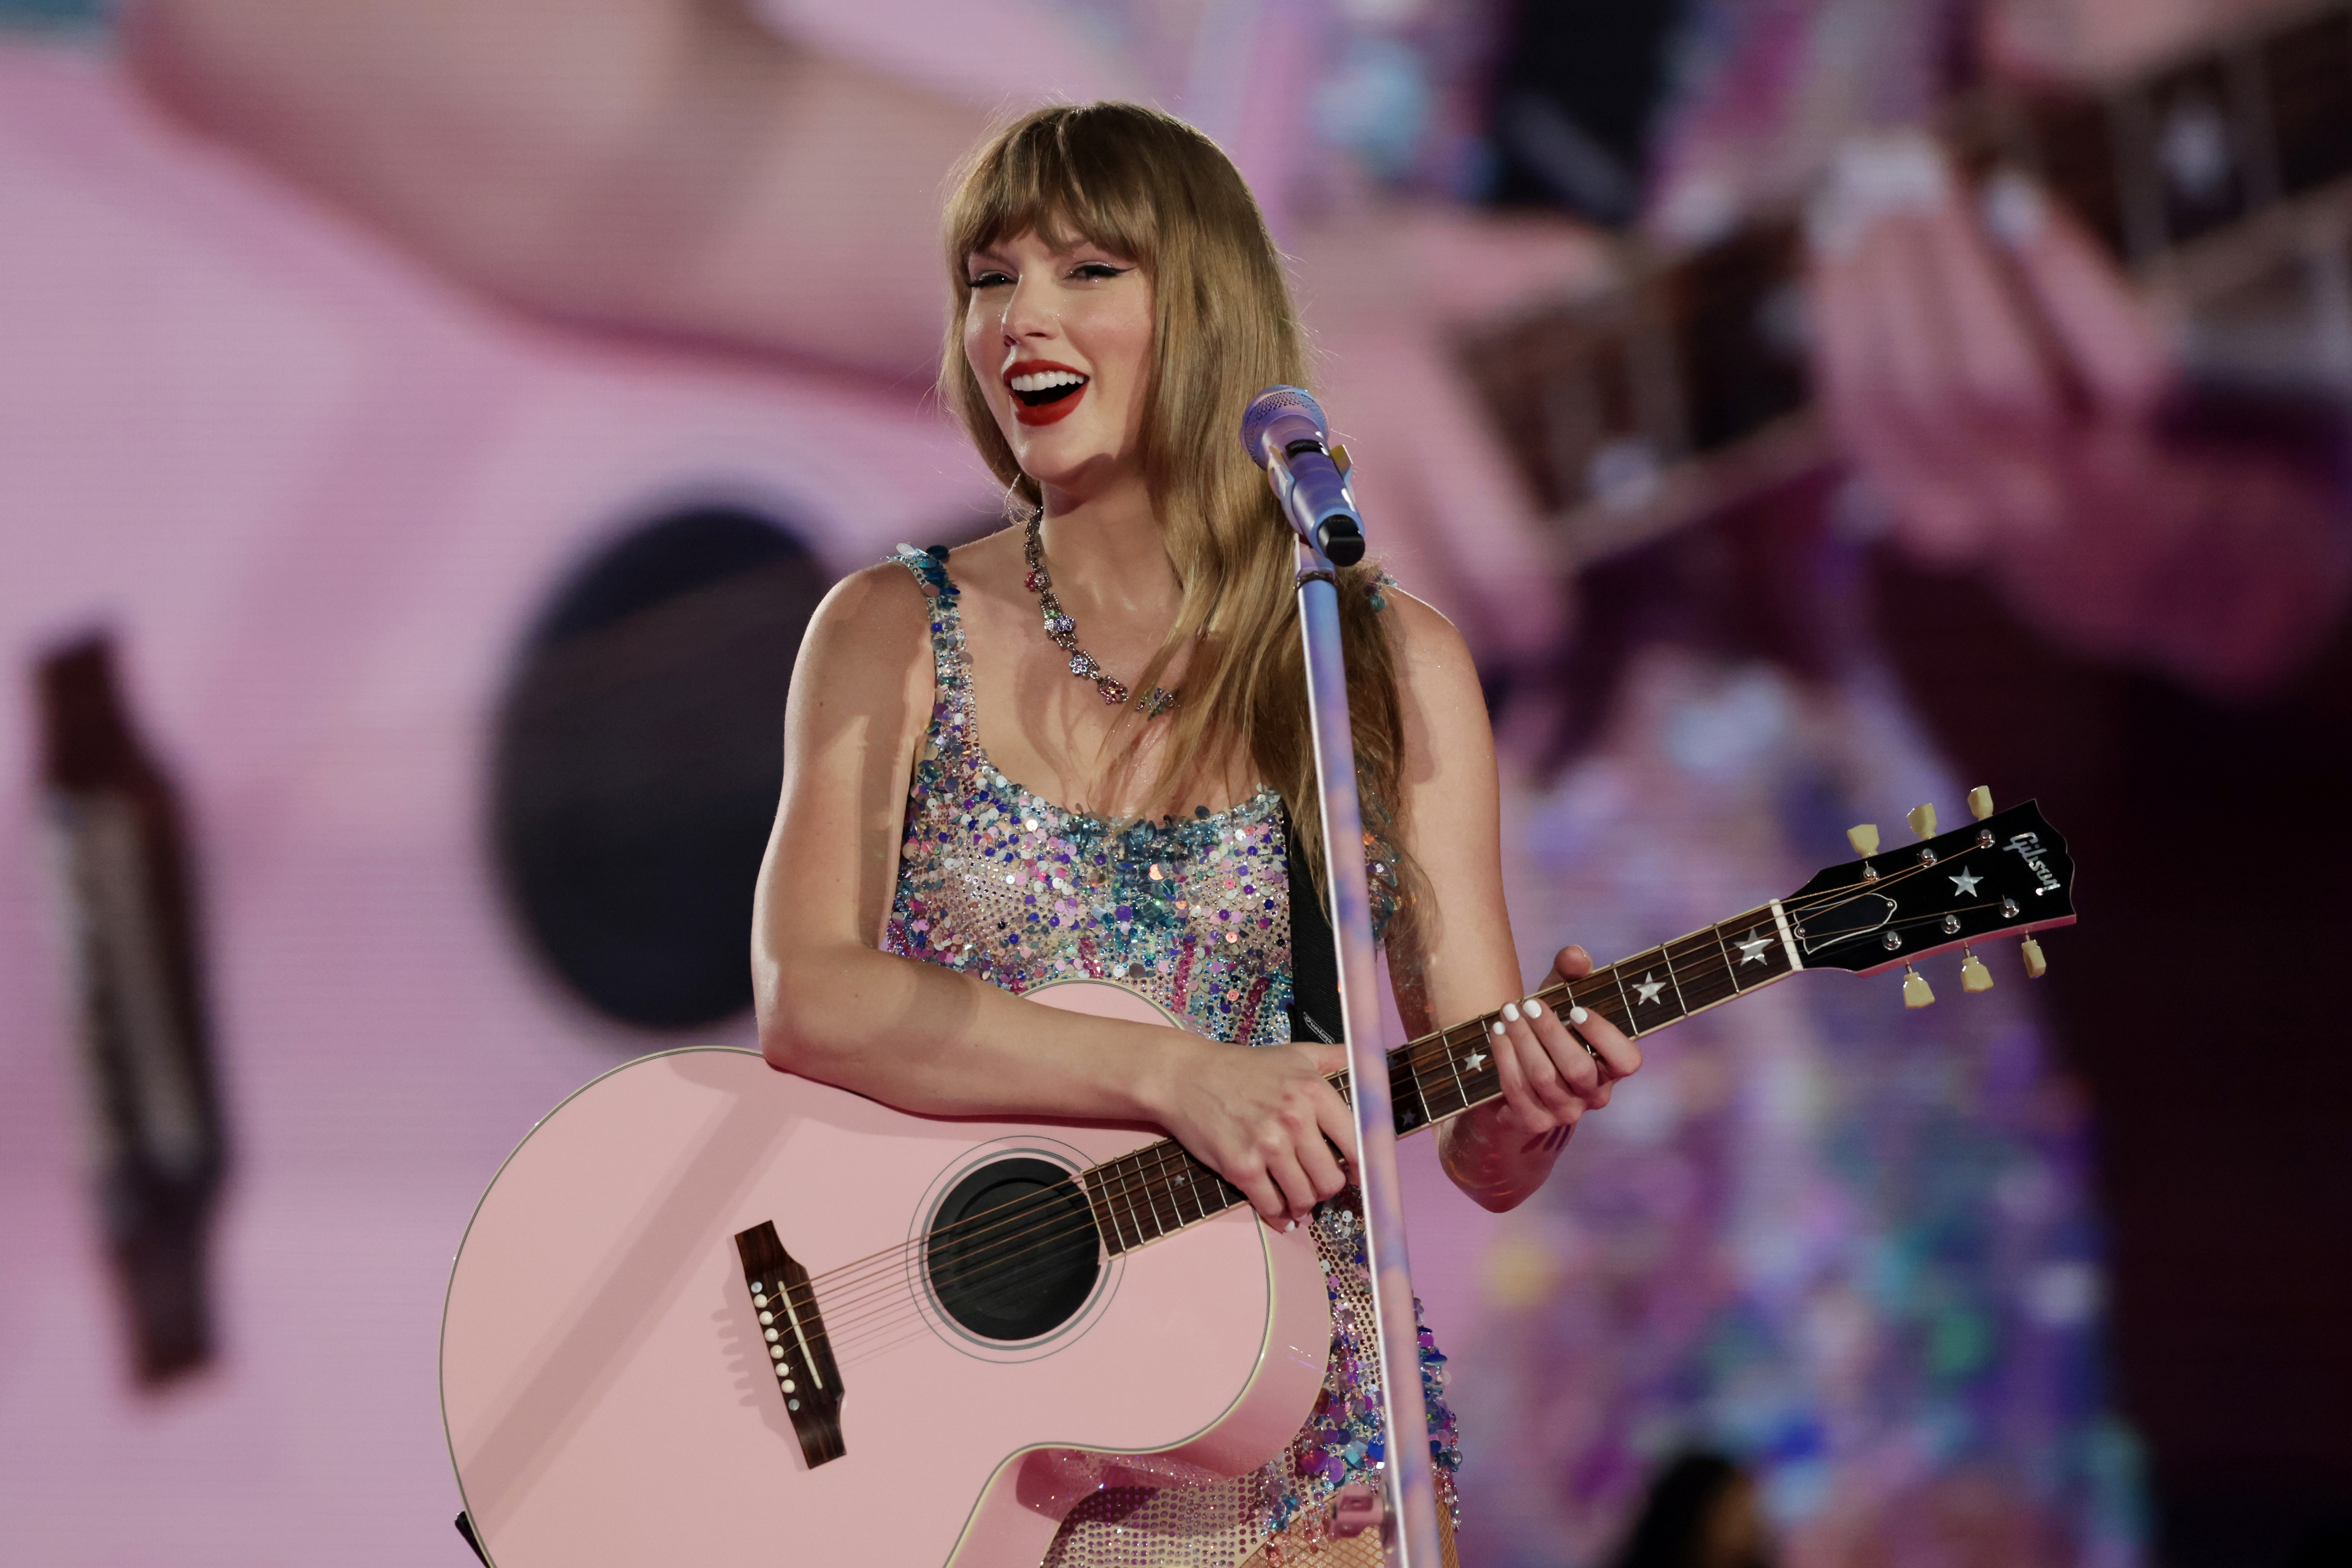 Taylor Swift performs on stage with a glittery top and a guitar